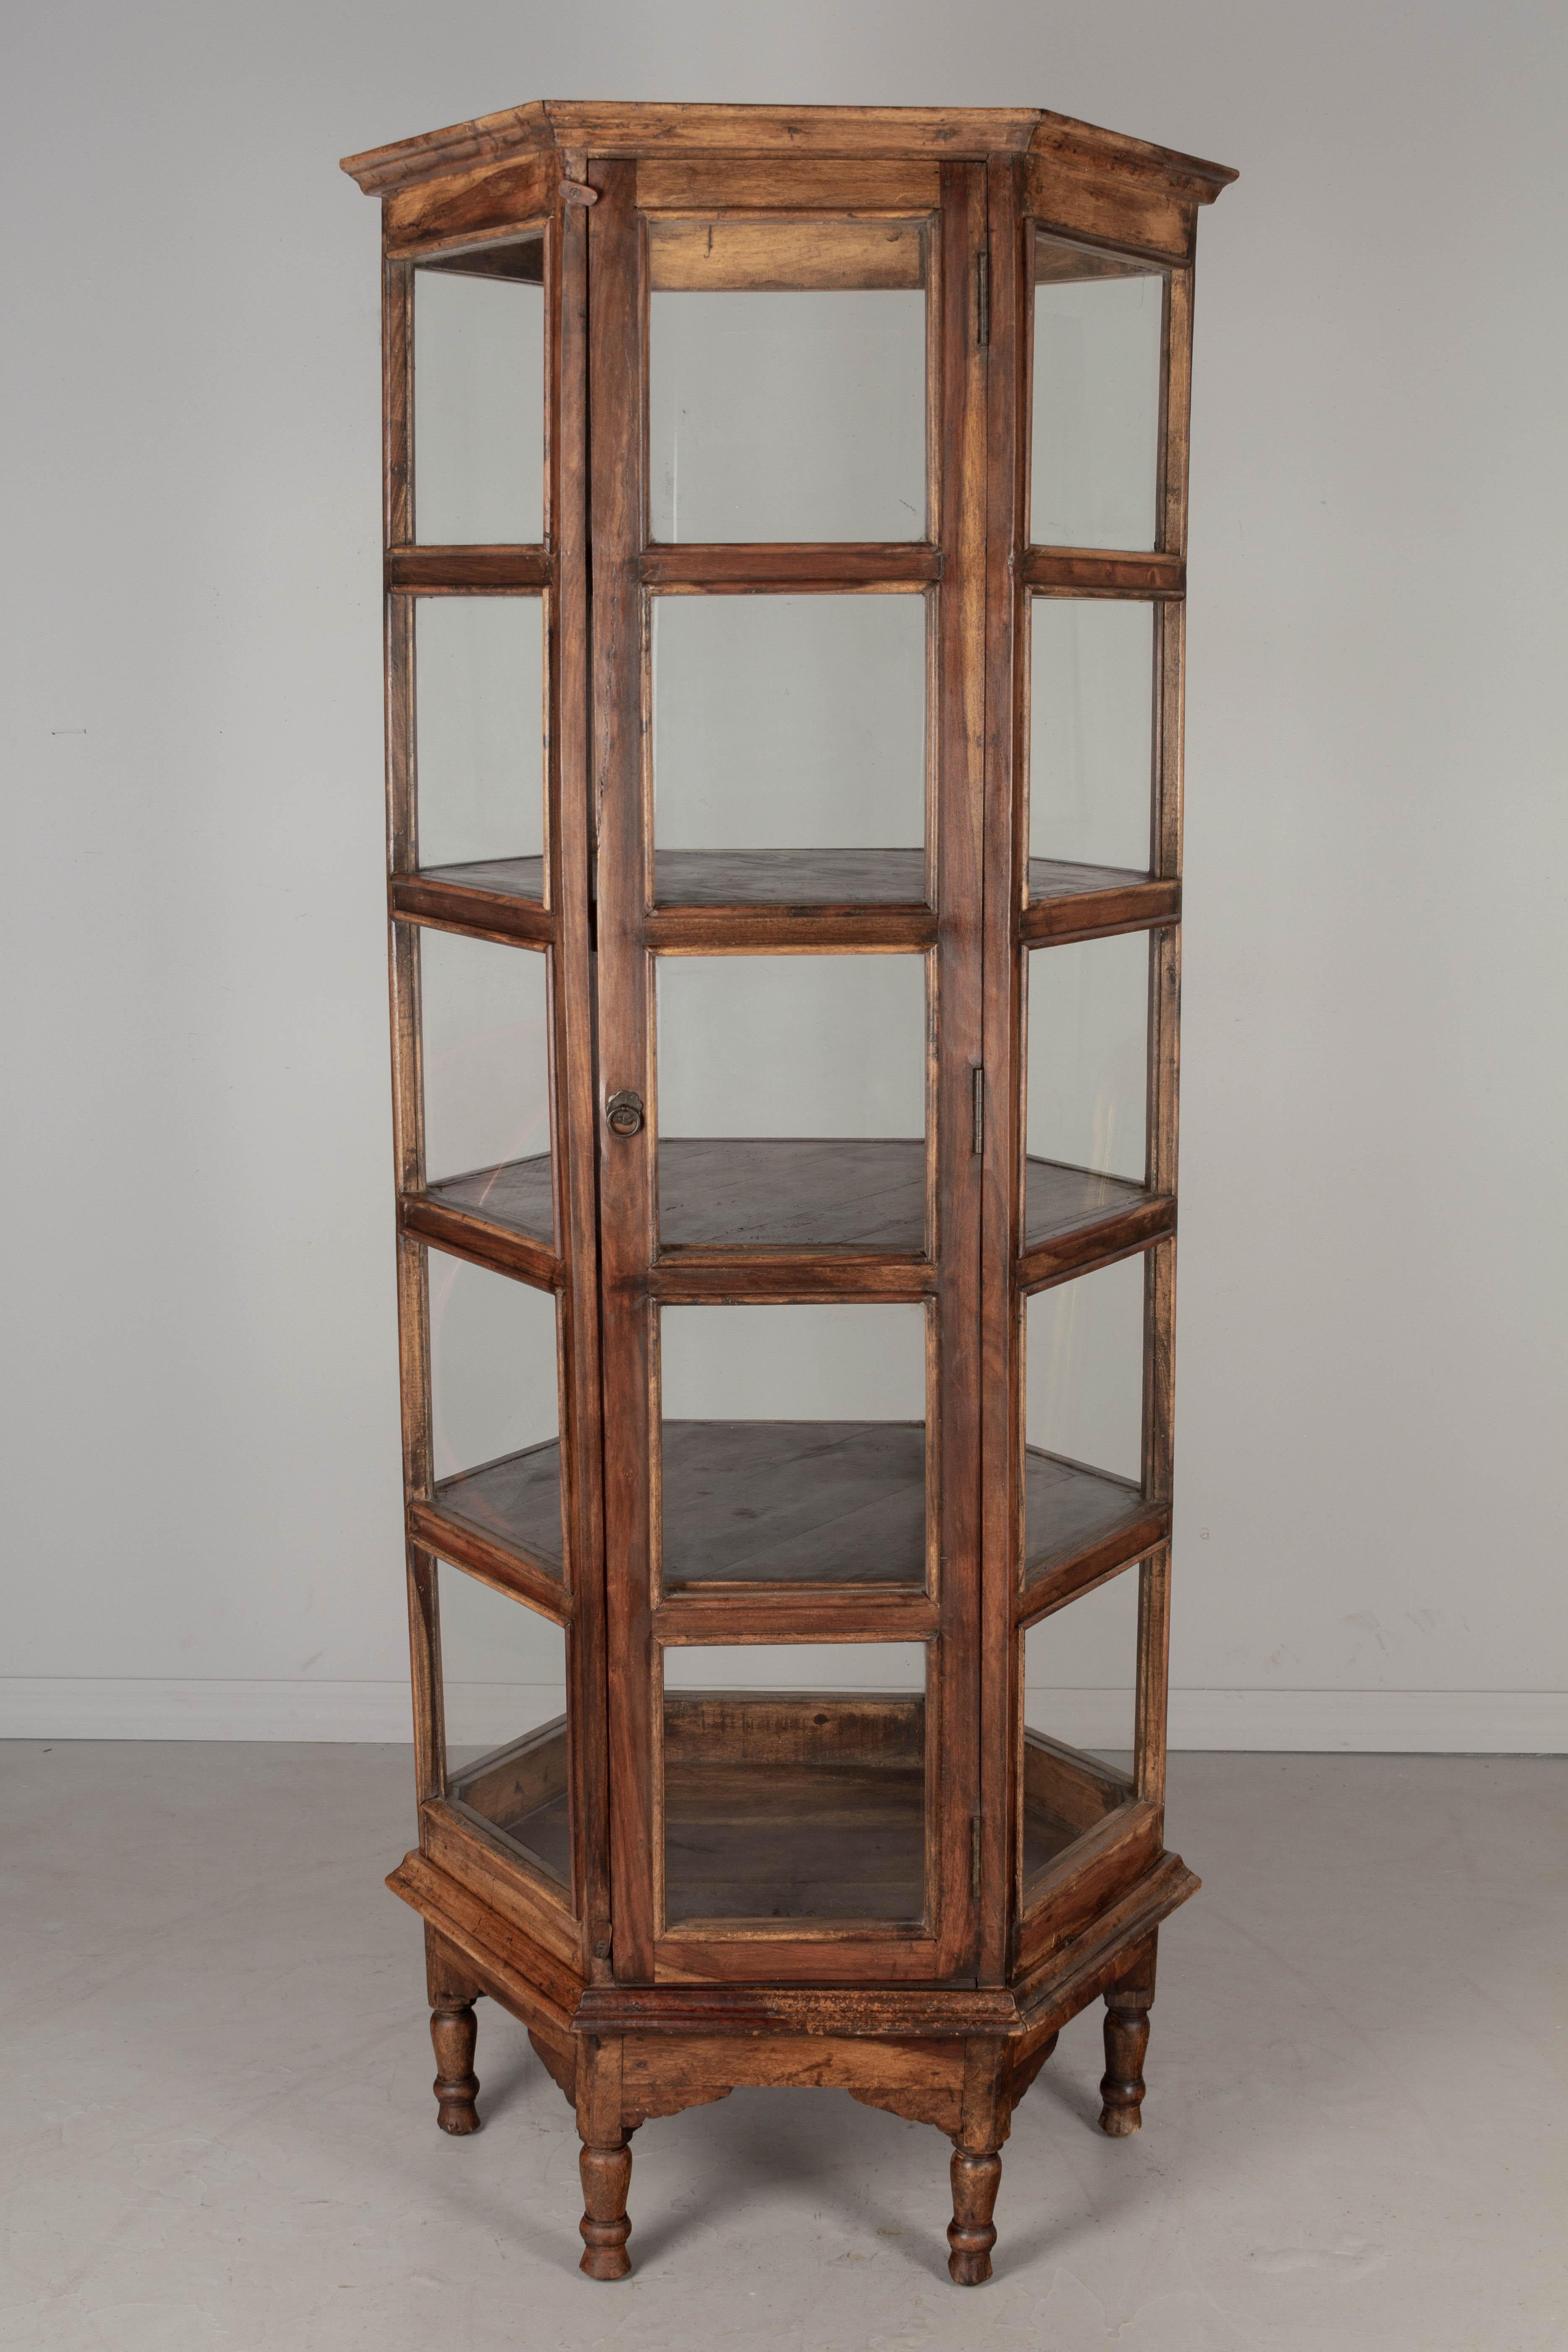 A large, heavy hexagonal glass paned vitrine, or display cabinet, with four shelves. Hand-crafted hardwood frame with tuned legs. Door with ring pull and wooden latches at the top and bottom. Circa 1950s.
Overall dimensions: 78.25